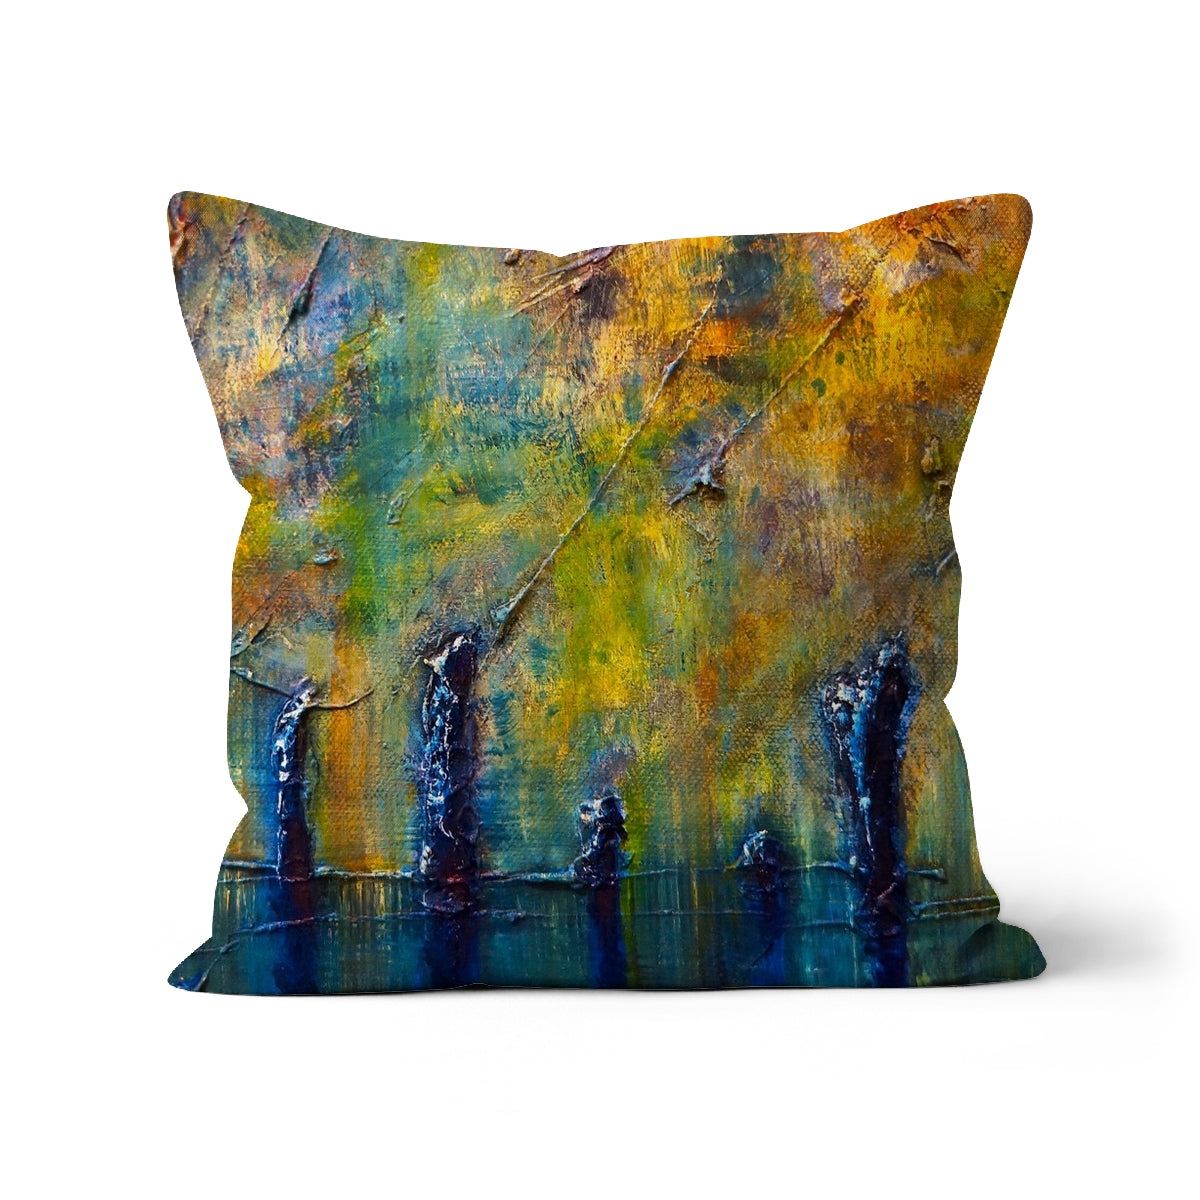 Stenness Moonlight Orkney Art Gifts Cushion-Cushions-Orkney Art Gallery-Canvas-18"x18"-Paintings, Prints, Homeware, Art Gifts From Scotland By Scottish Artist Kevin Hunter